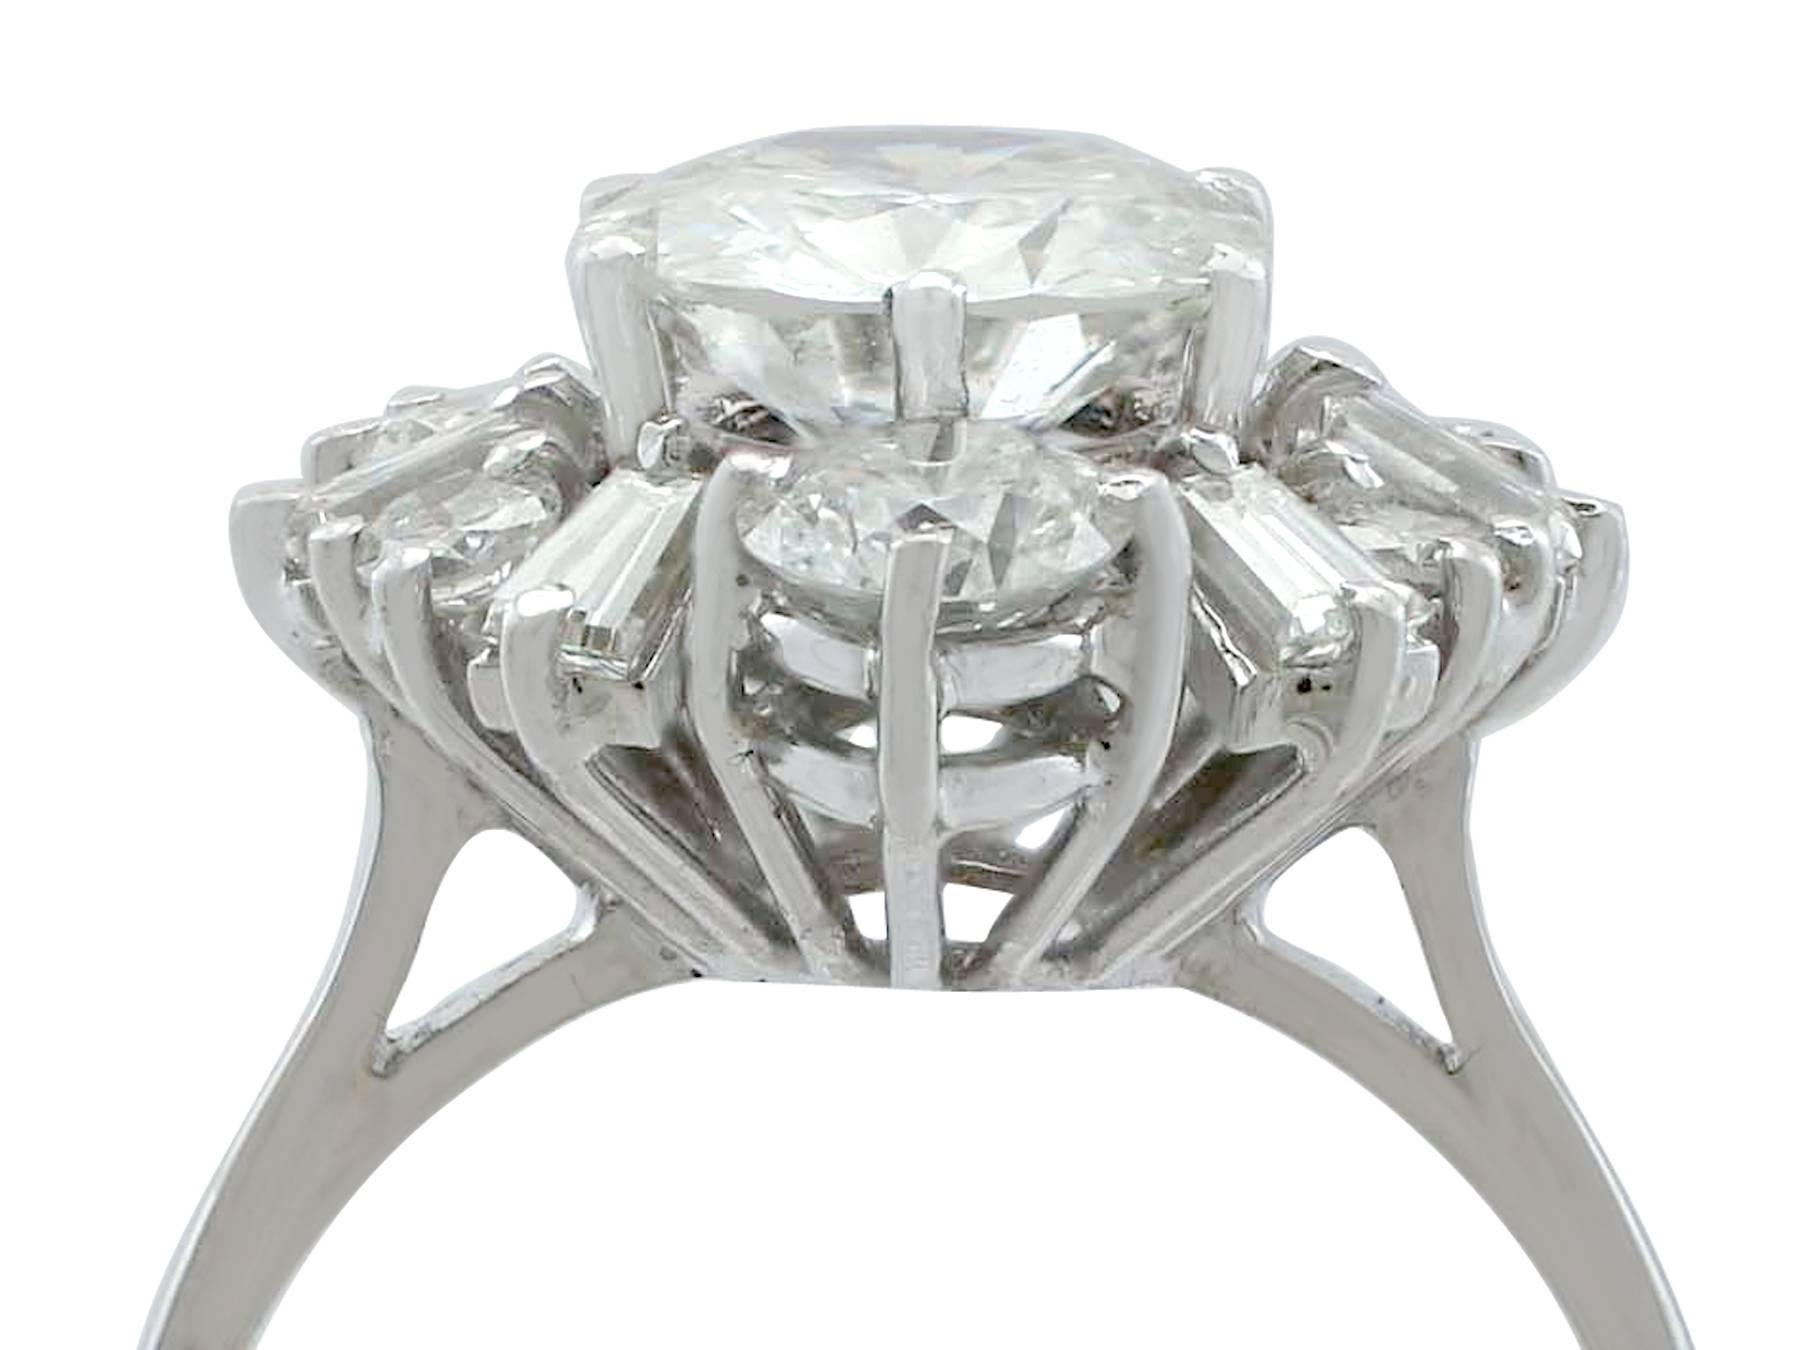 A stunning, fine and impressive vintage 3.17 carat diamond (total) and 18 karat white gold cluster ring in the Art Deco style; part of our diverse vintage jewelry collections.

This stunning, fine and impressive diamond cluster ring has been crafted